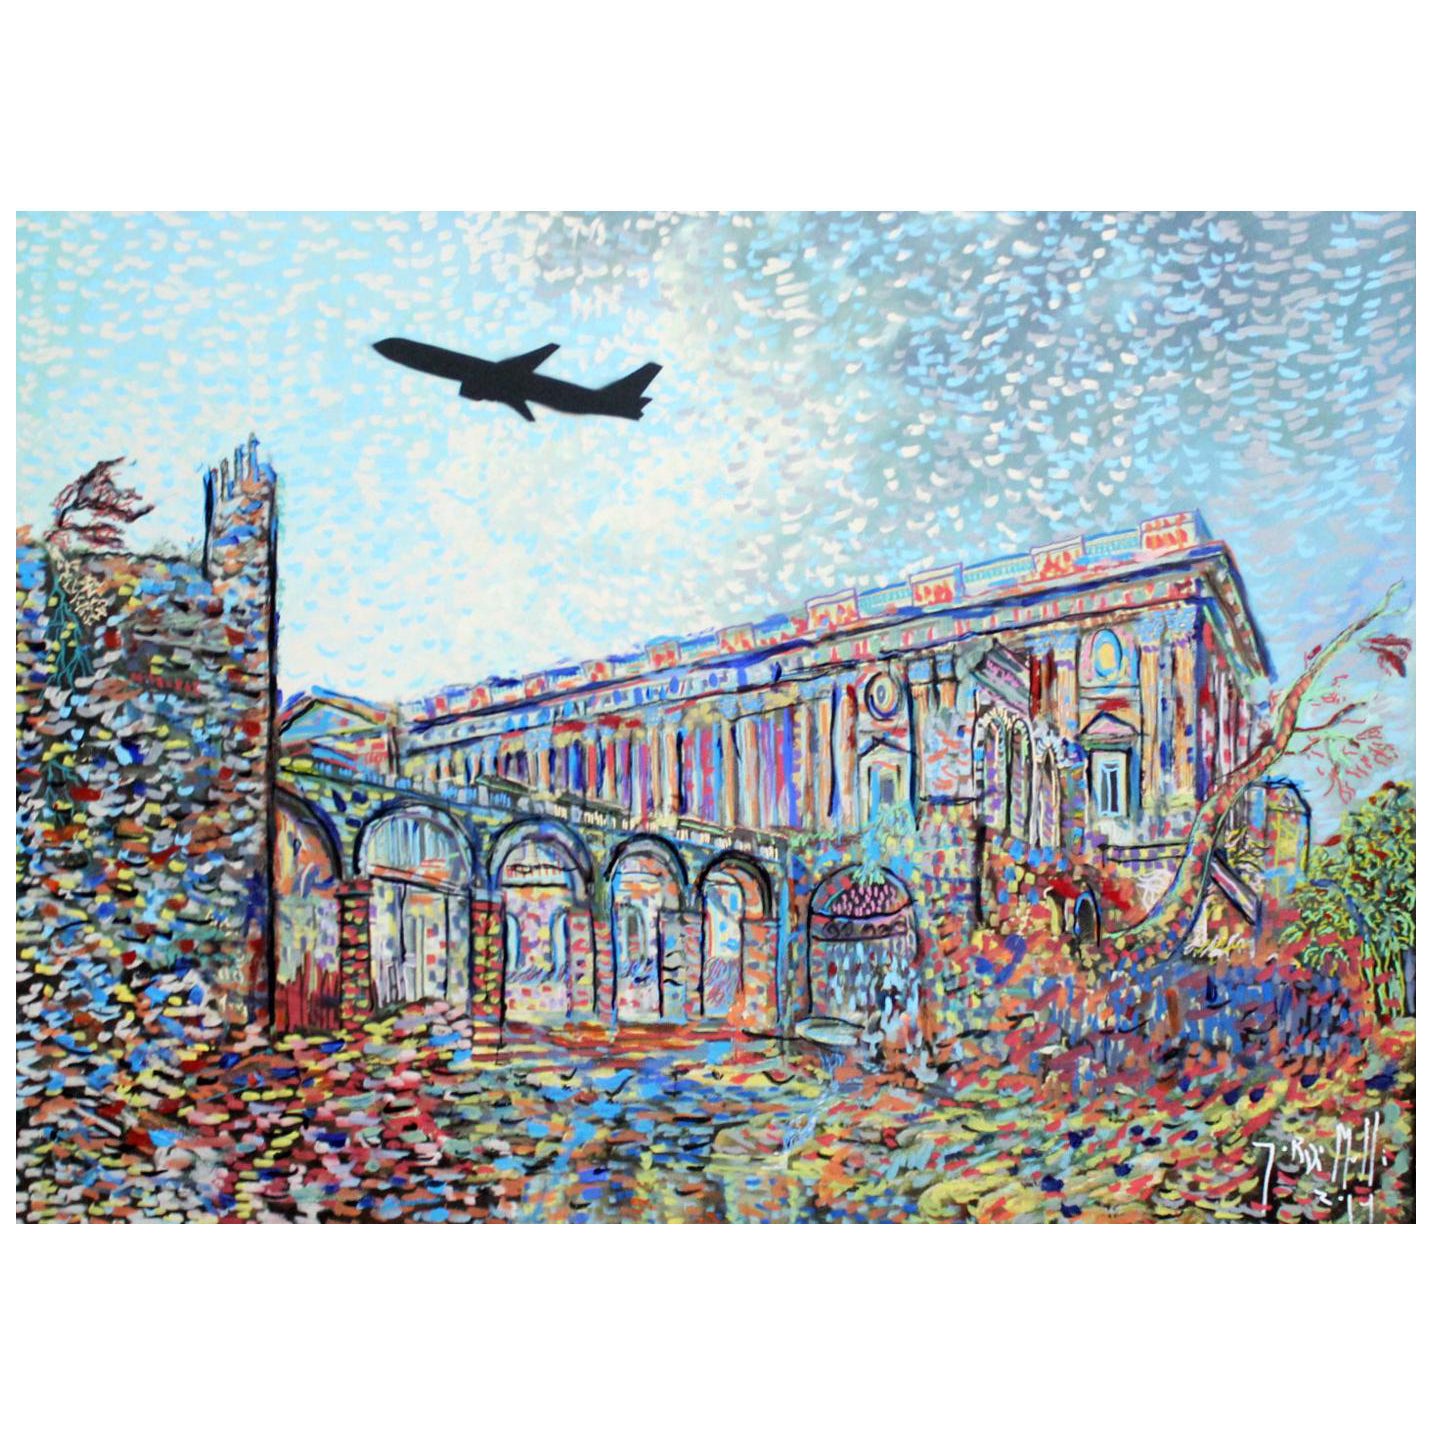 2014 Pointillist Painting by Artist and Actor Jordi Mollá